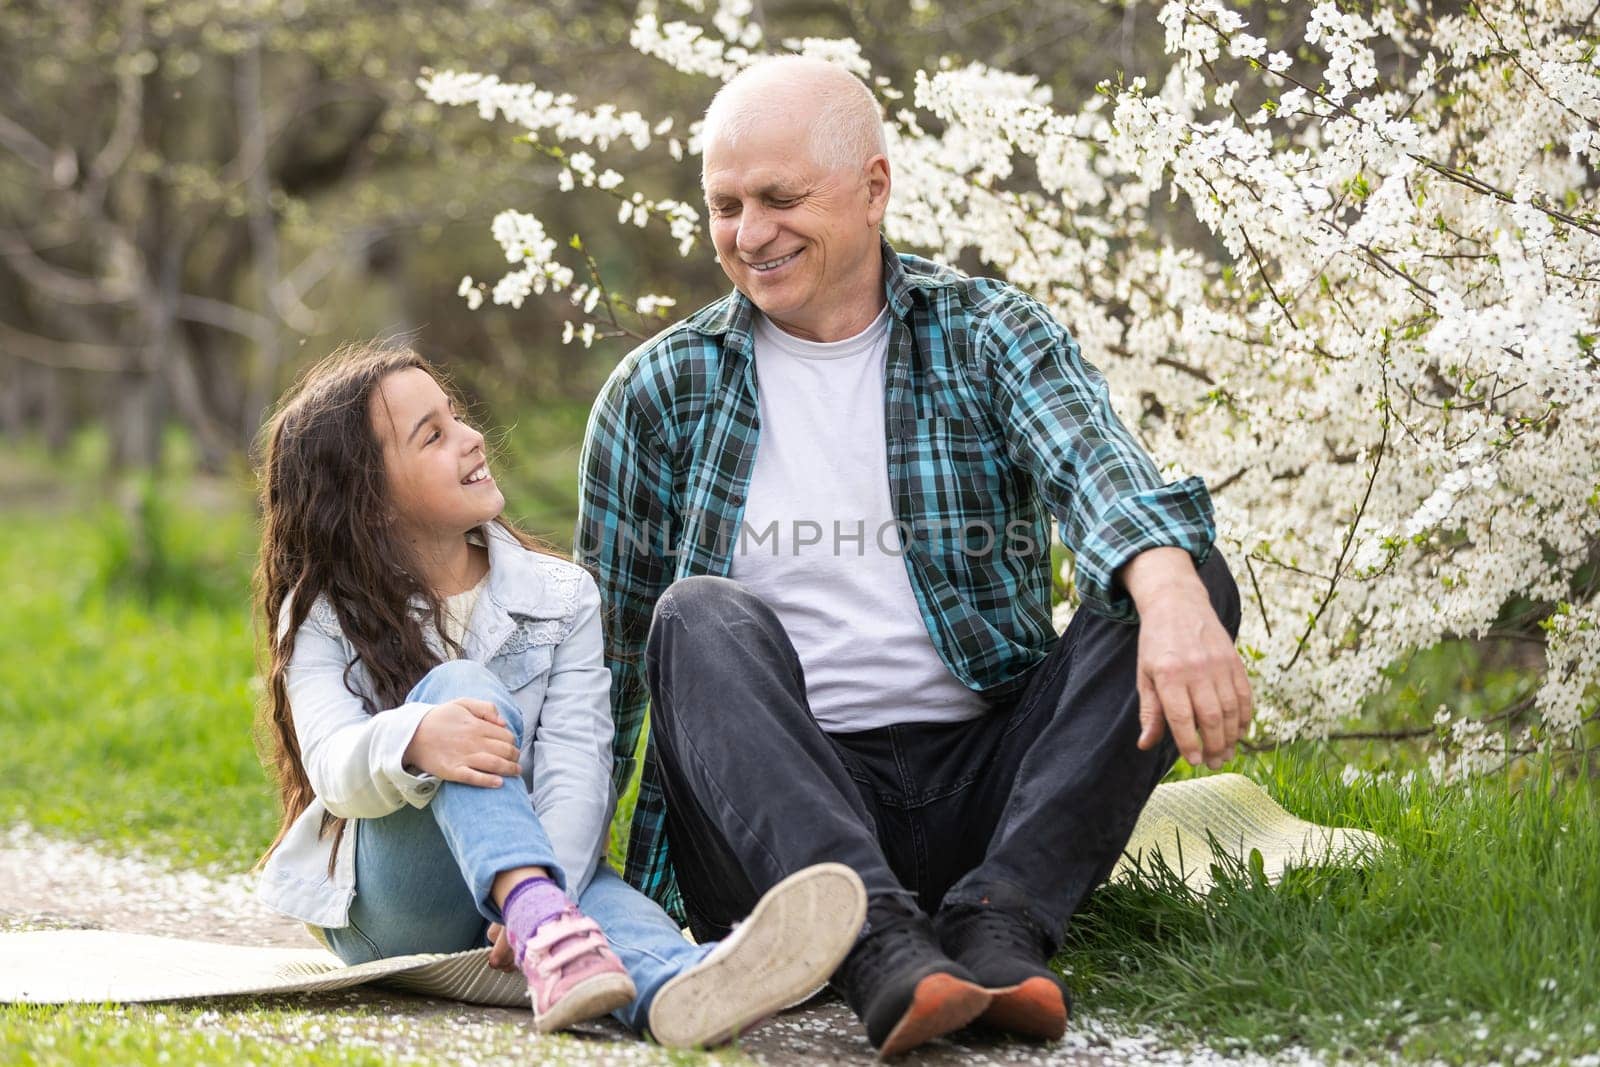 Smiling child hugging her happy grandfather - outdoor in nature